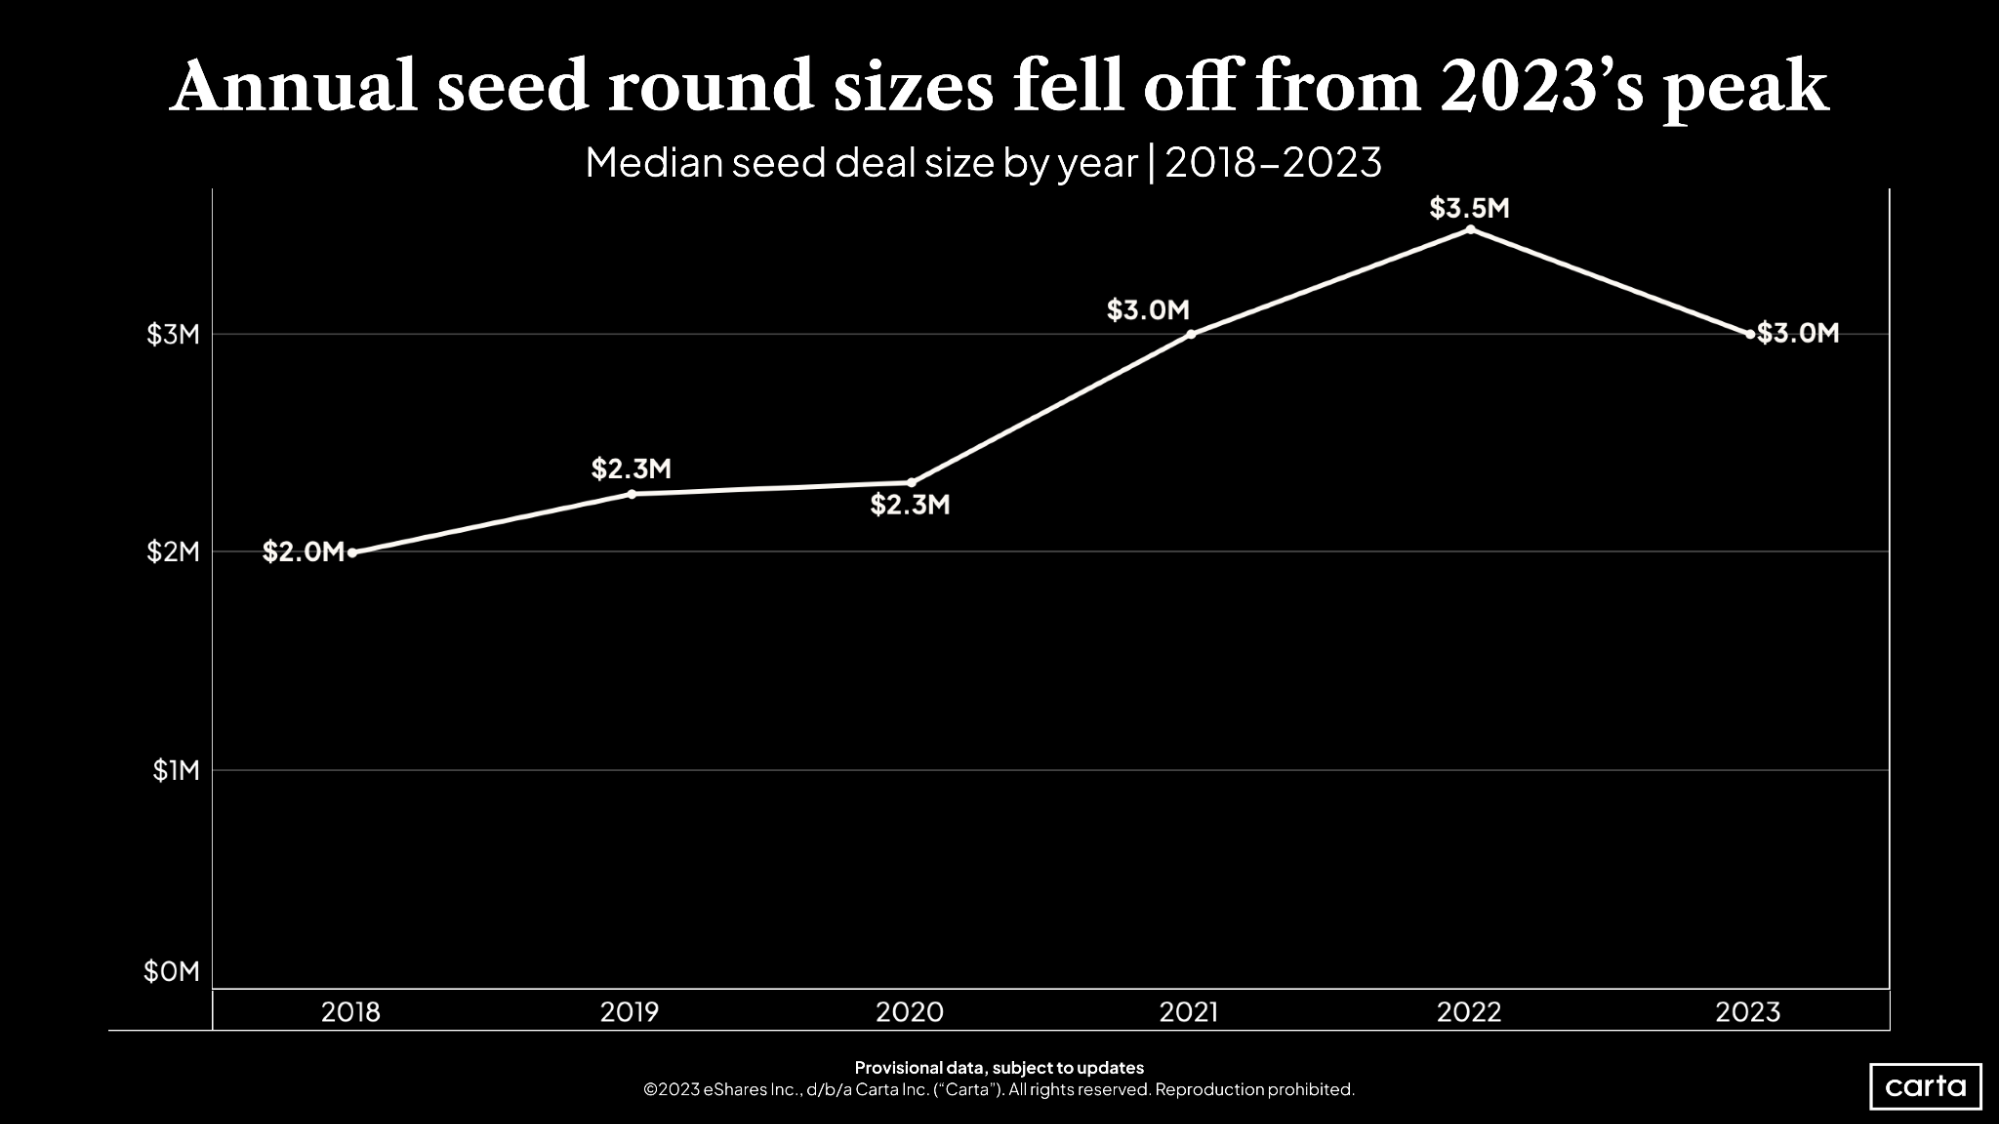 Carta Annual seed round sizes fell off from 2023 peak